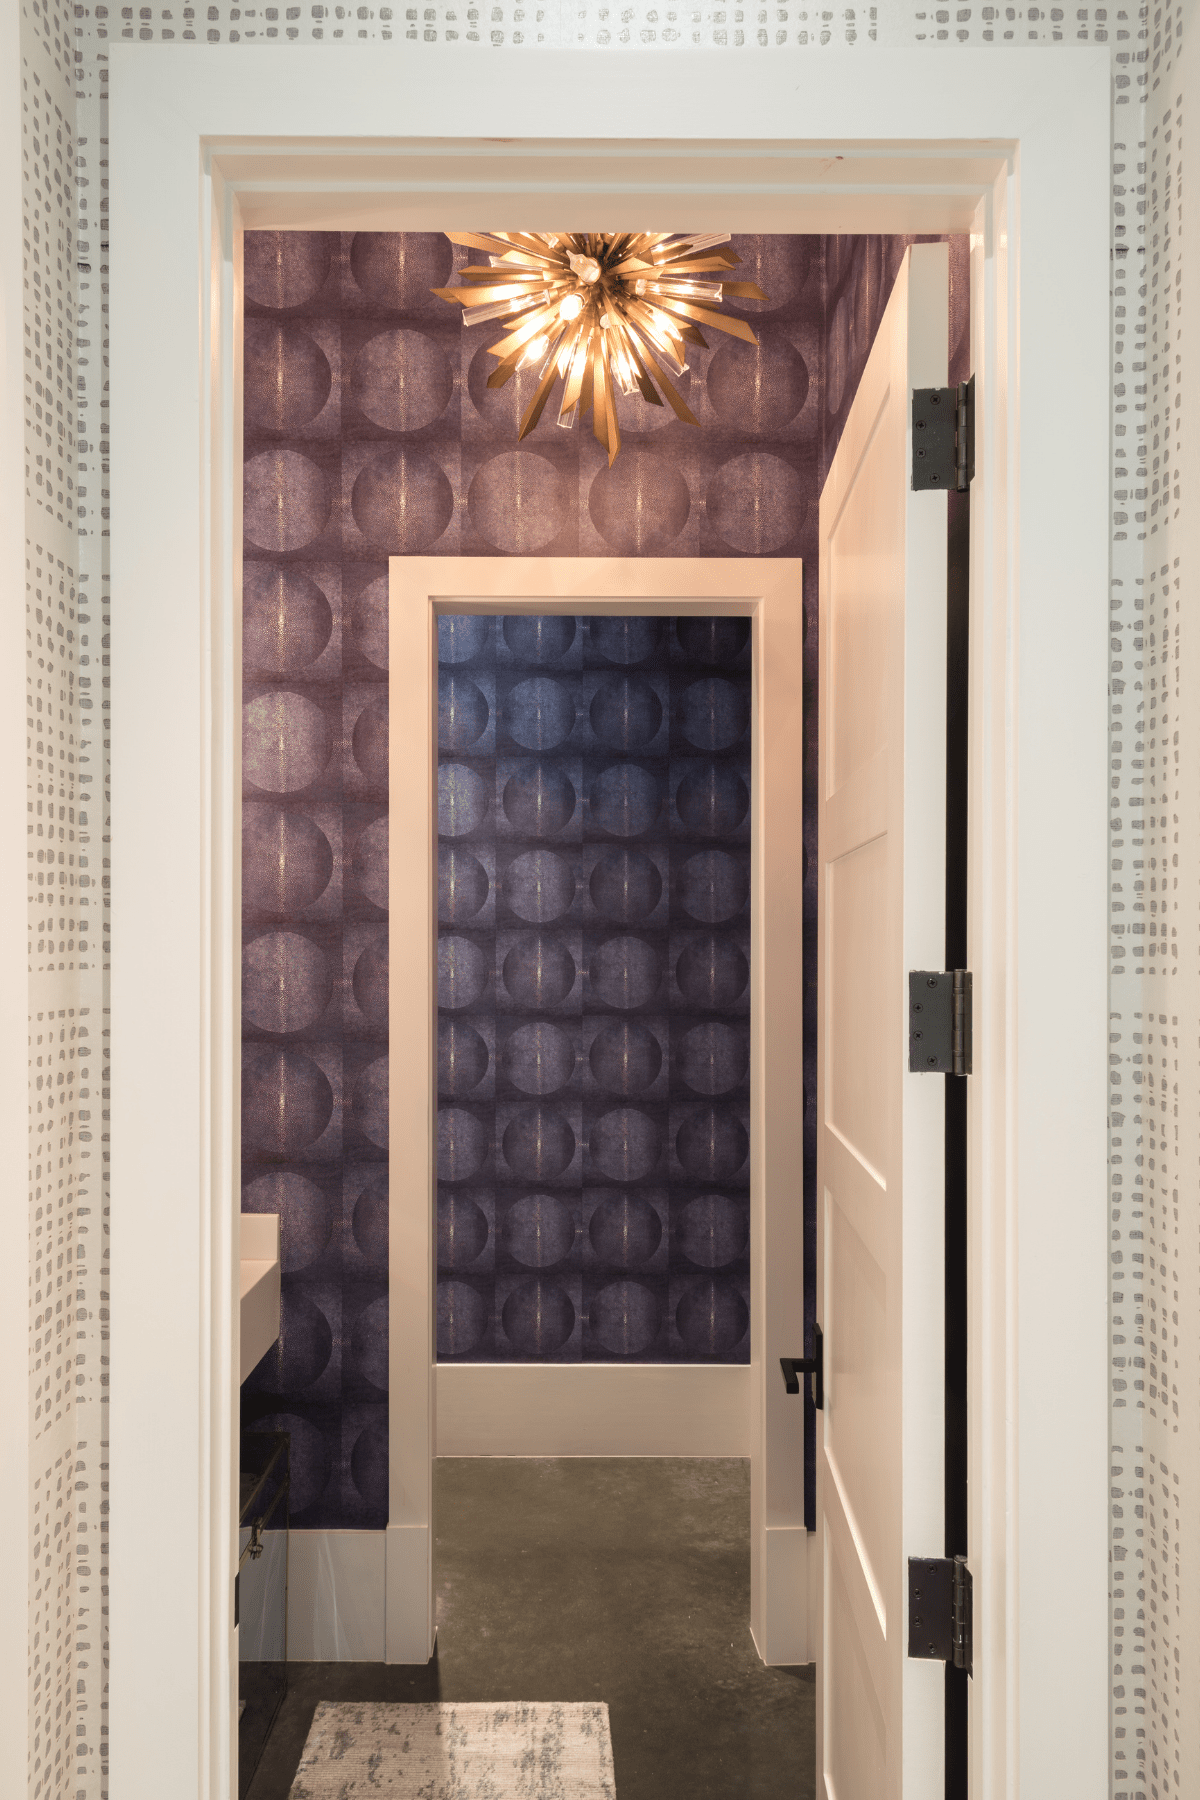 A shot of the custom-colored chagrin wall covering for a Drexel powder room.